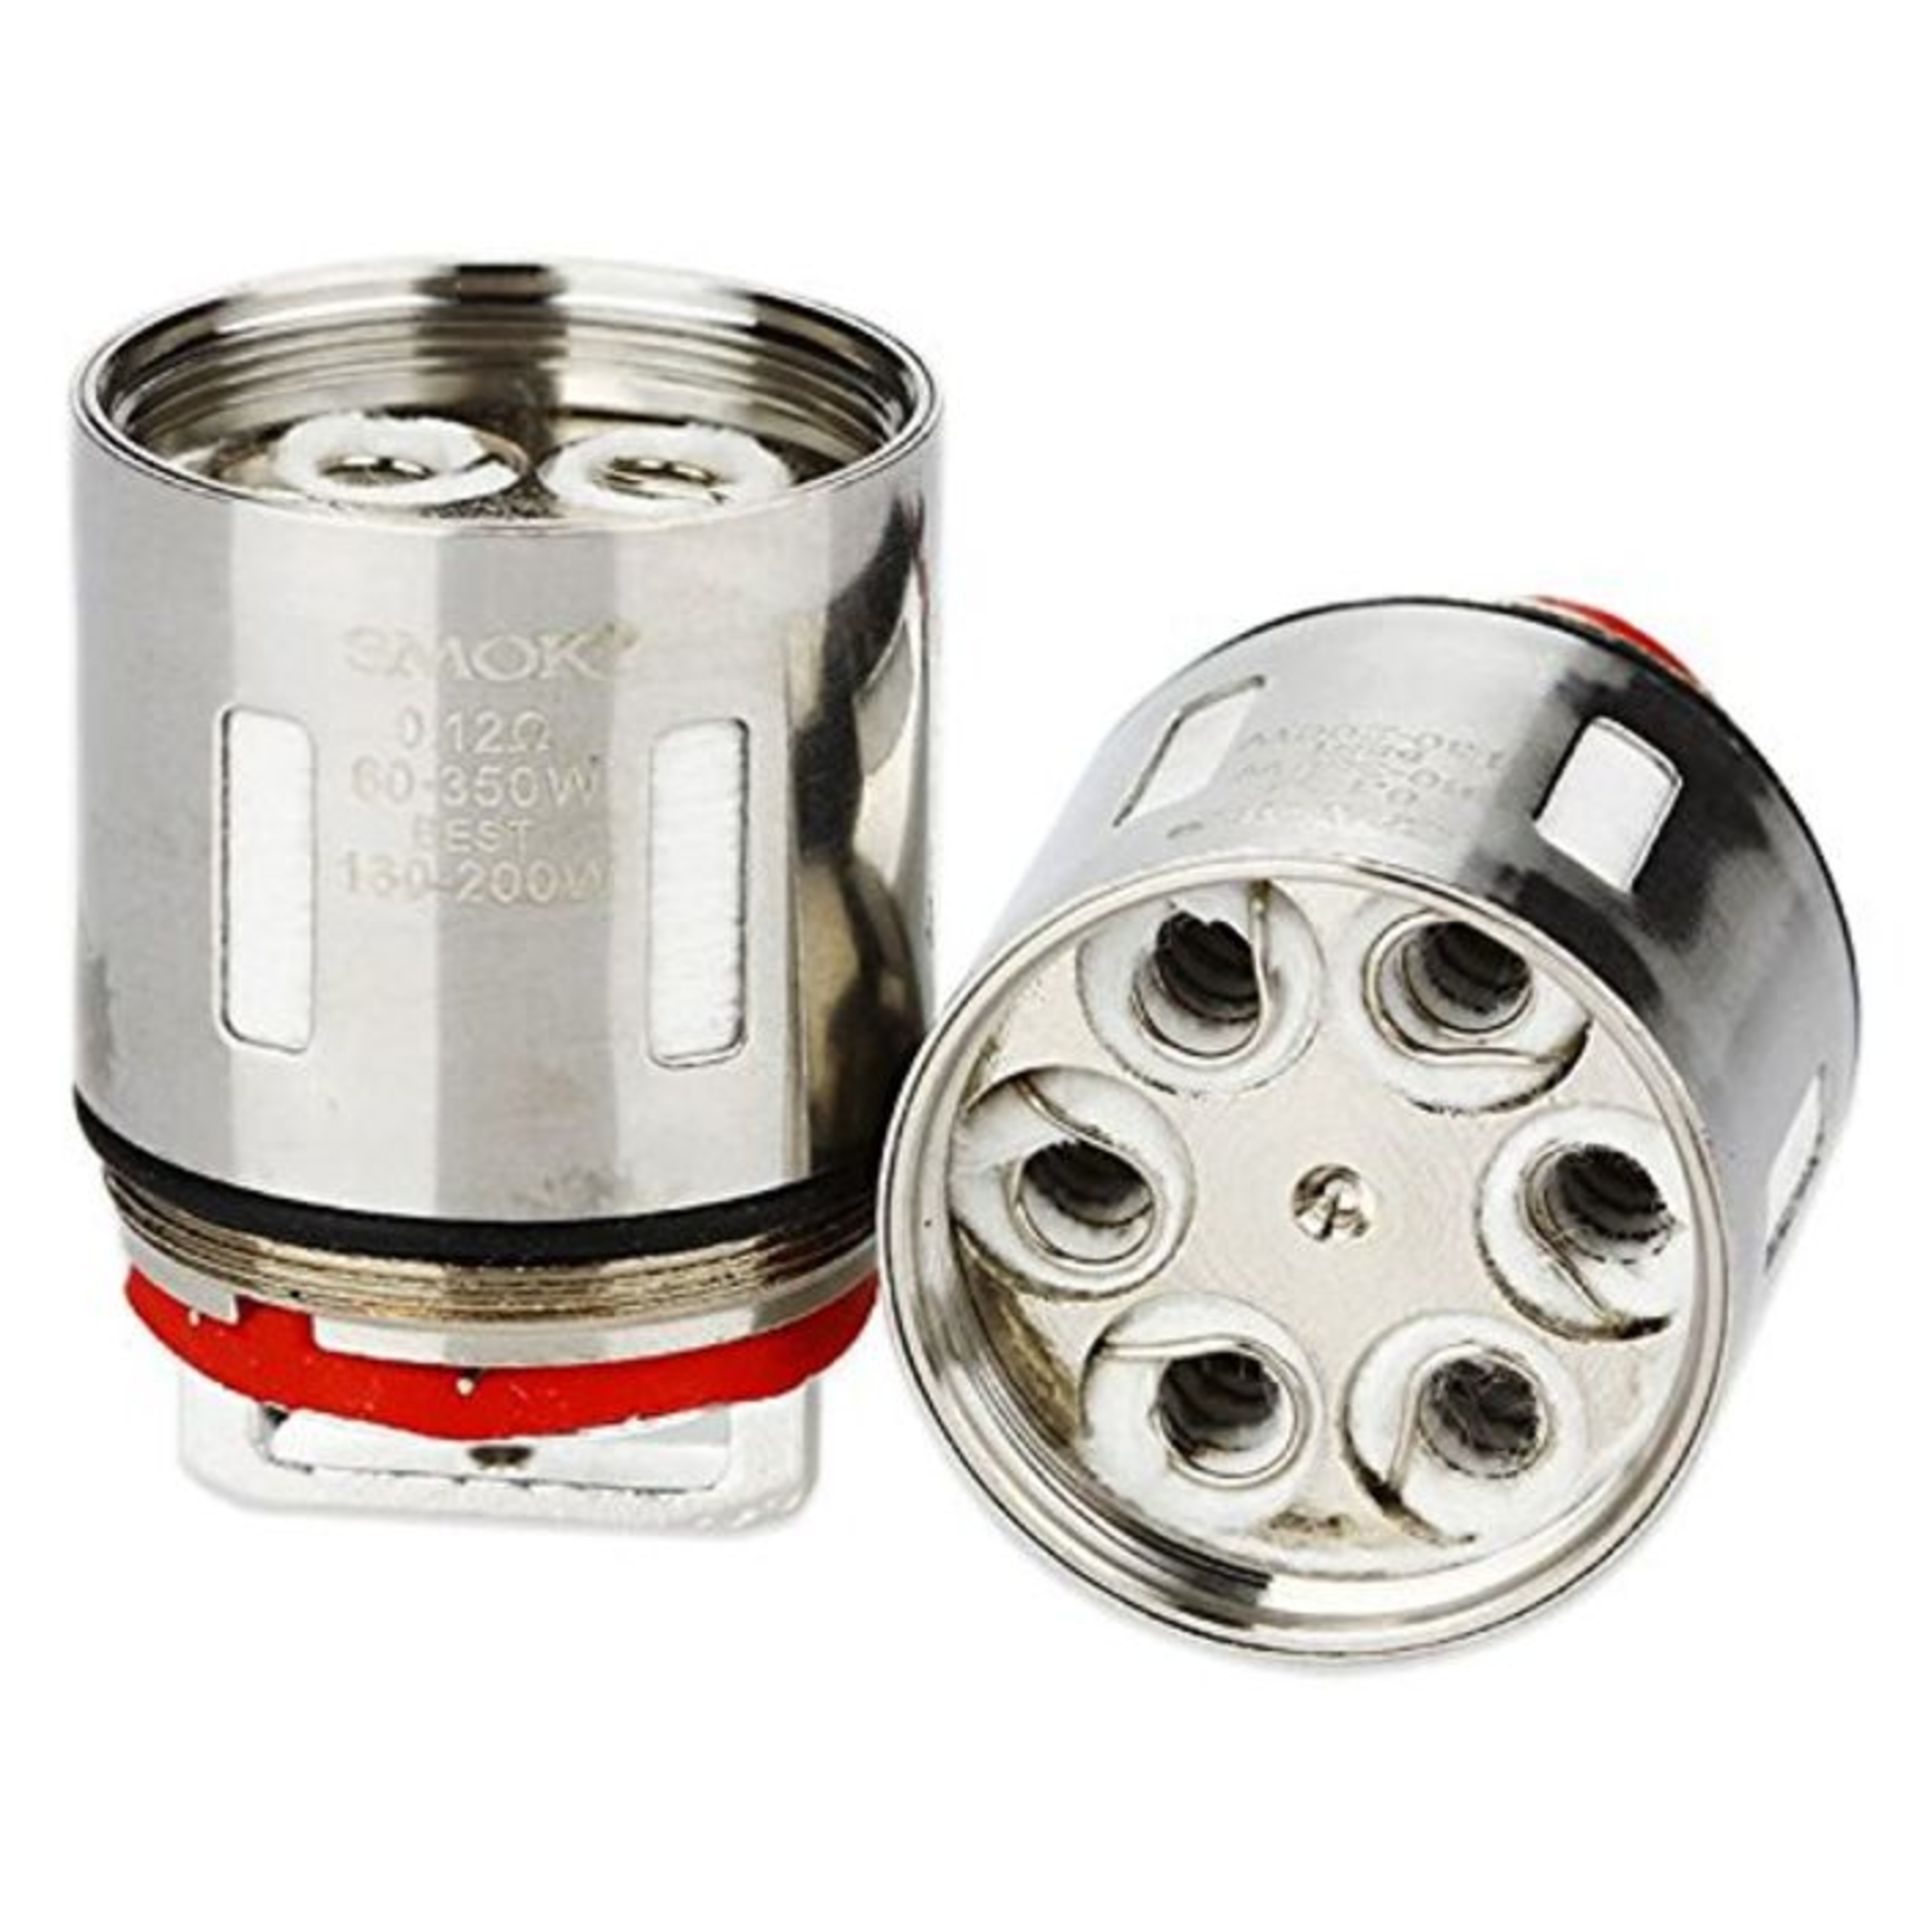 SMOK TFV12 Tank Replacement Coils 0.12ohm V12-T12 Duodenary Coil